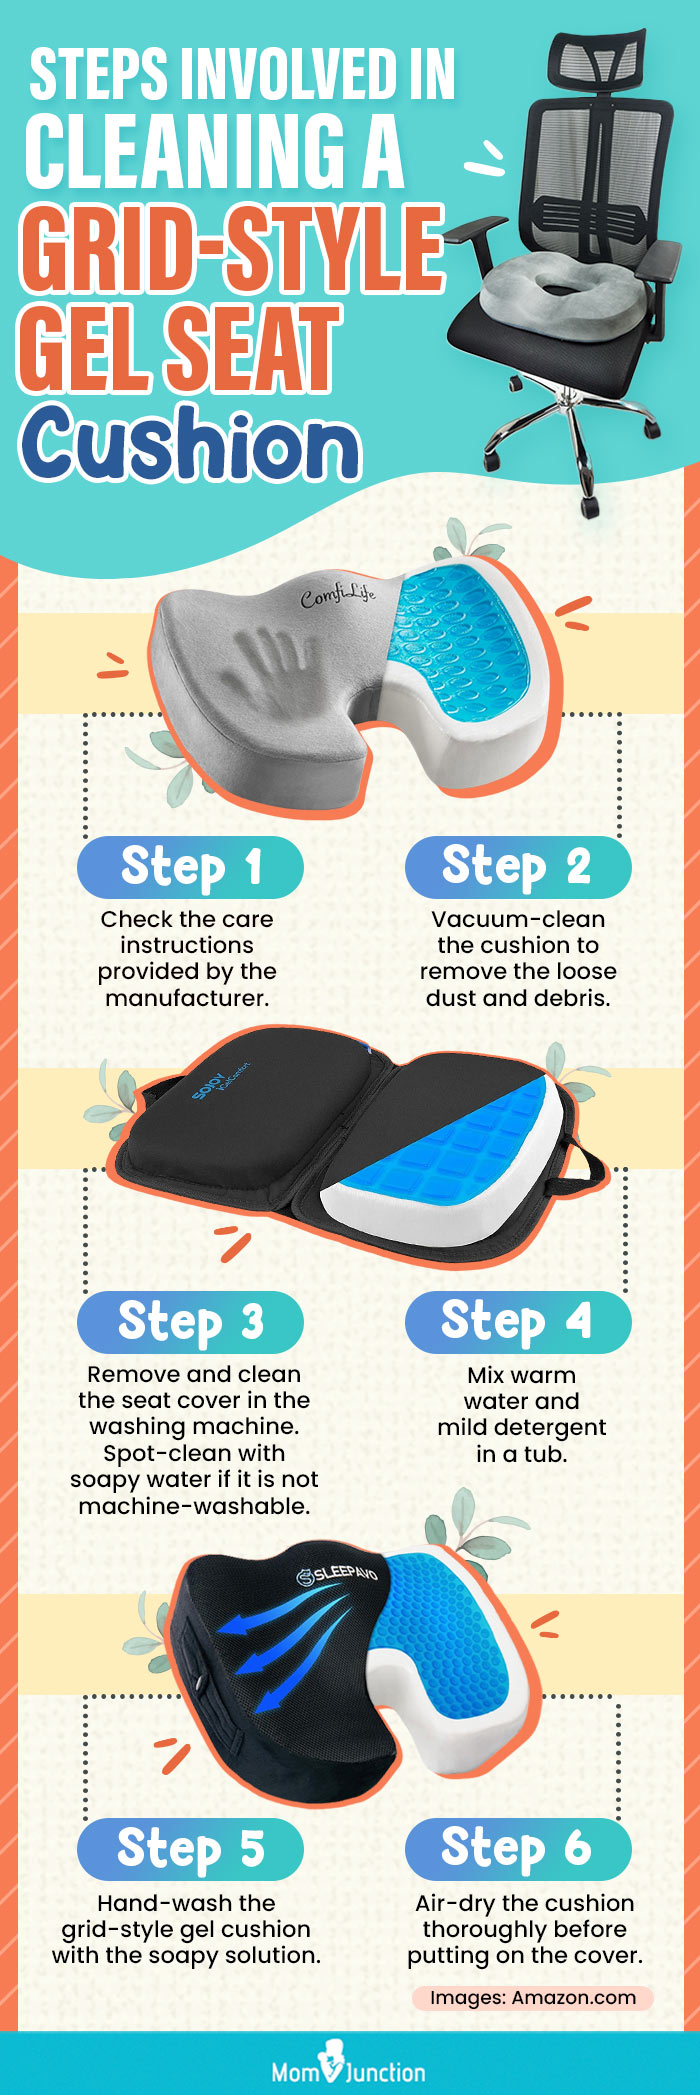 How To Clean And Maintain Grid-Style Gel Seat Cushions? (infographic)